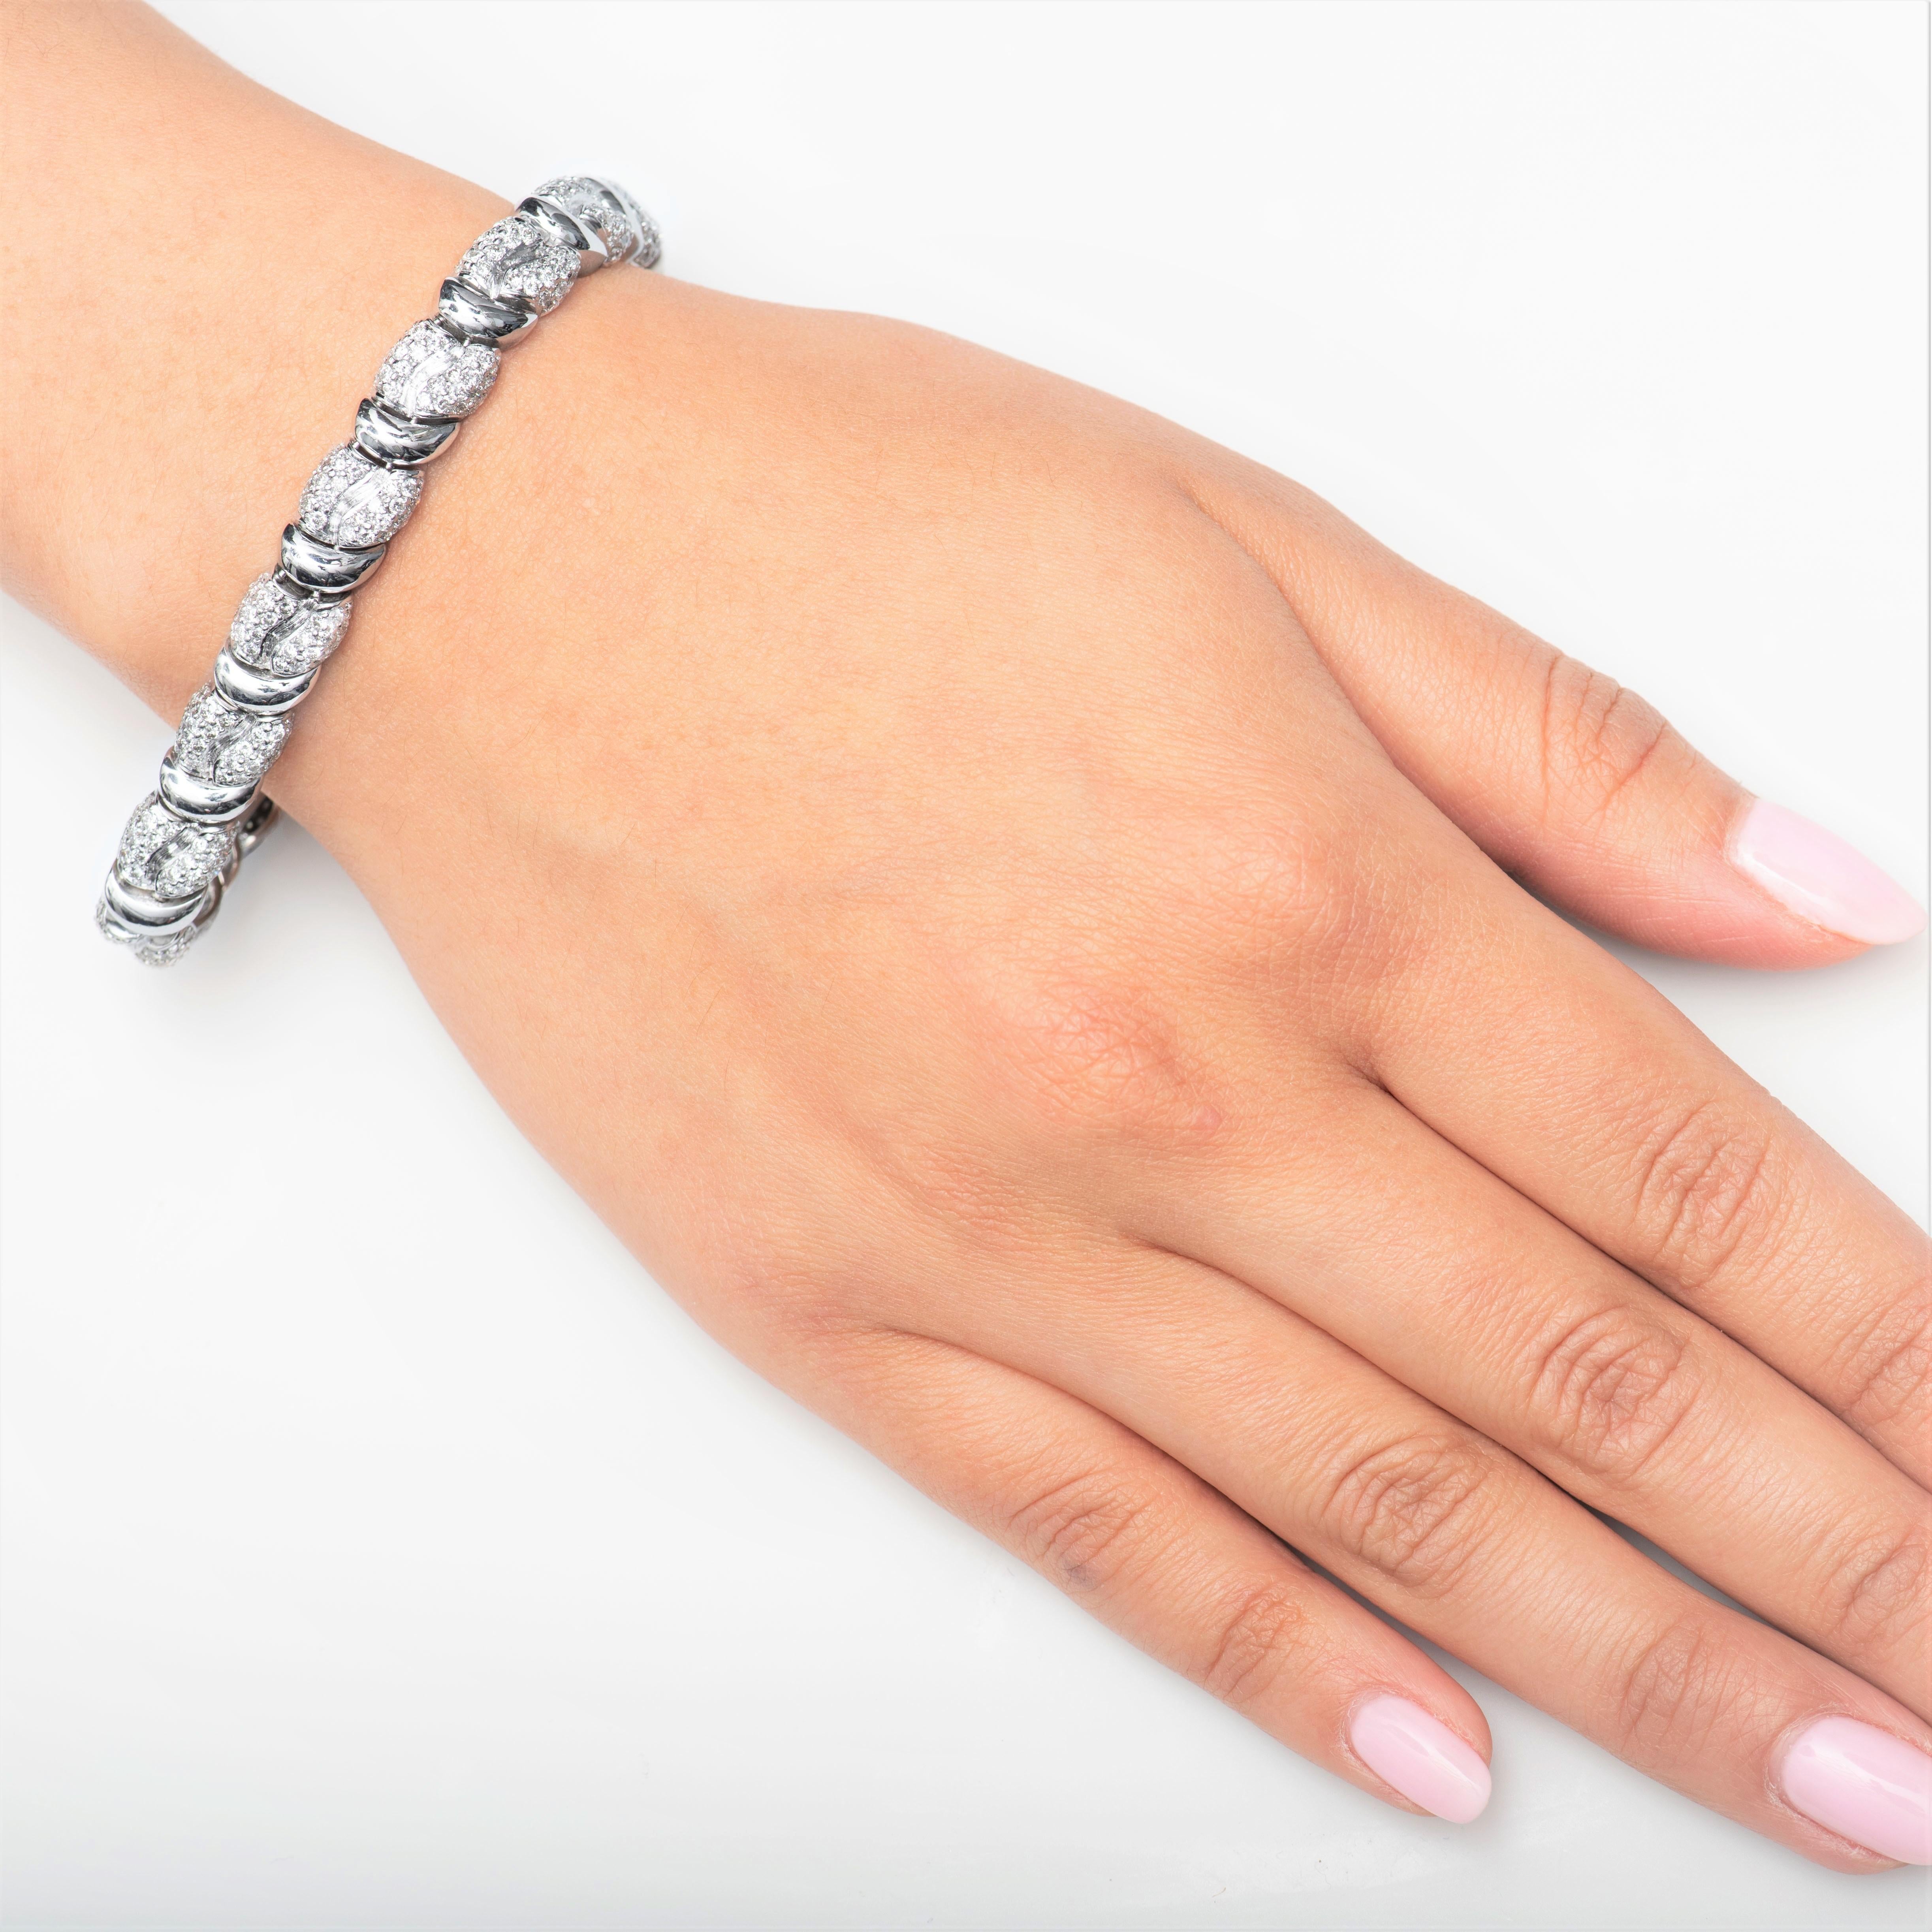 Estate 18K white gold bracelet with approximately 9.40 carats total in fine round white diamonds. The bracelet measures and fits a wrist size of 7 inches. The bracelet is beautifully crafted and makes a great addition to an everyday wear or to any